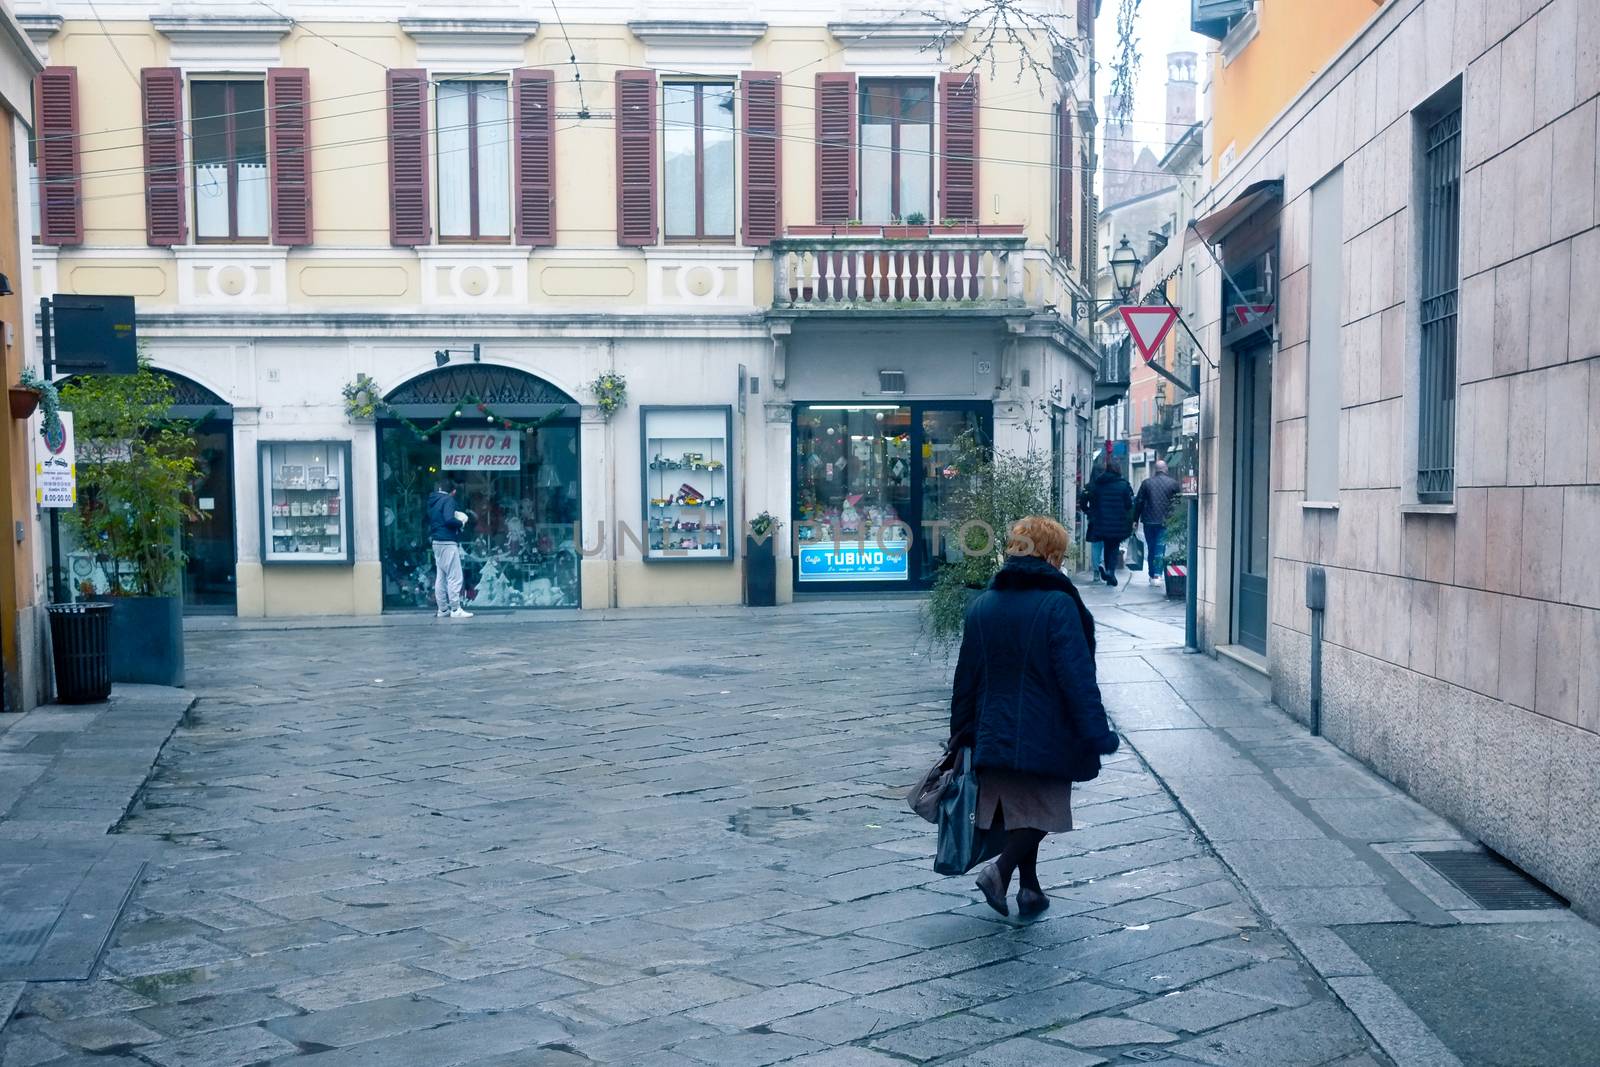 A woman walking alone in the city center